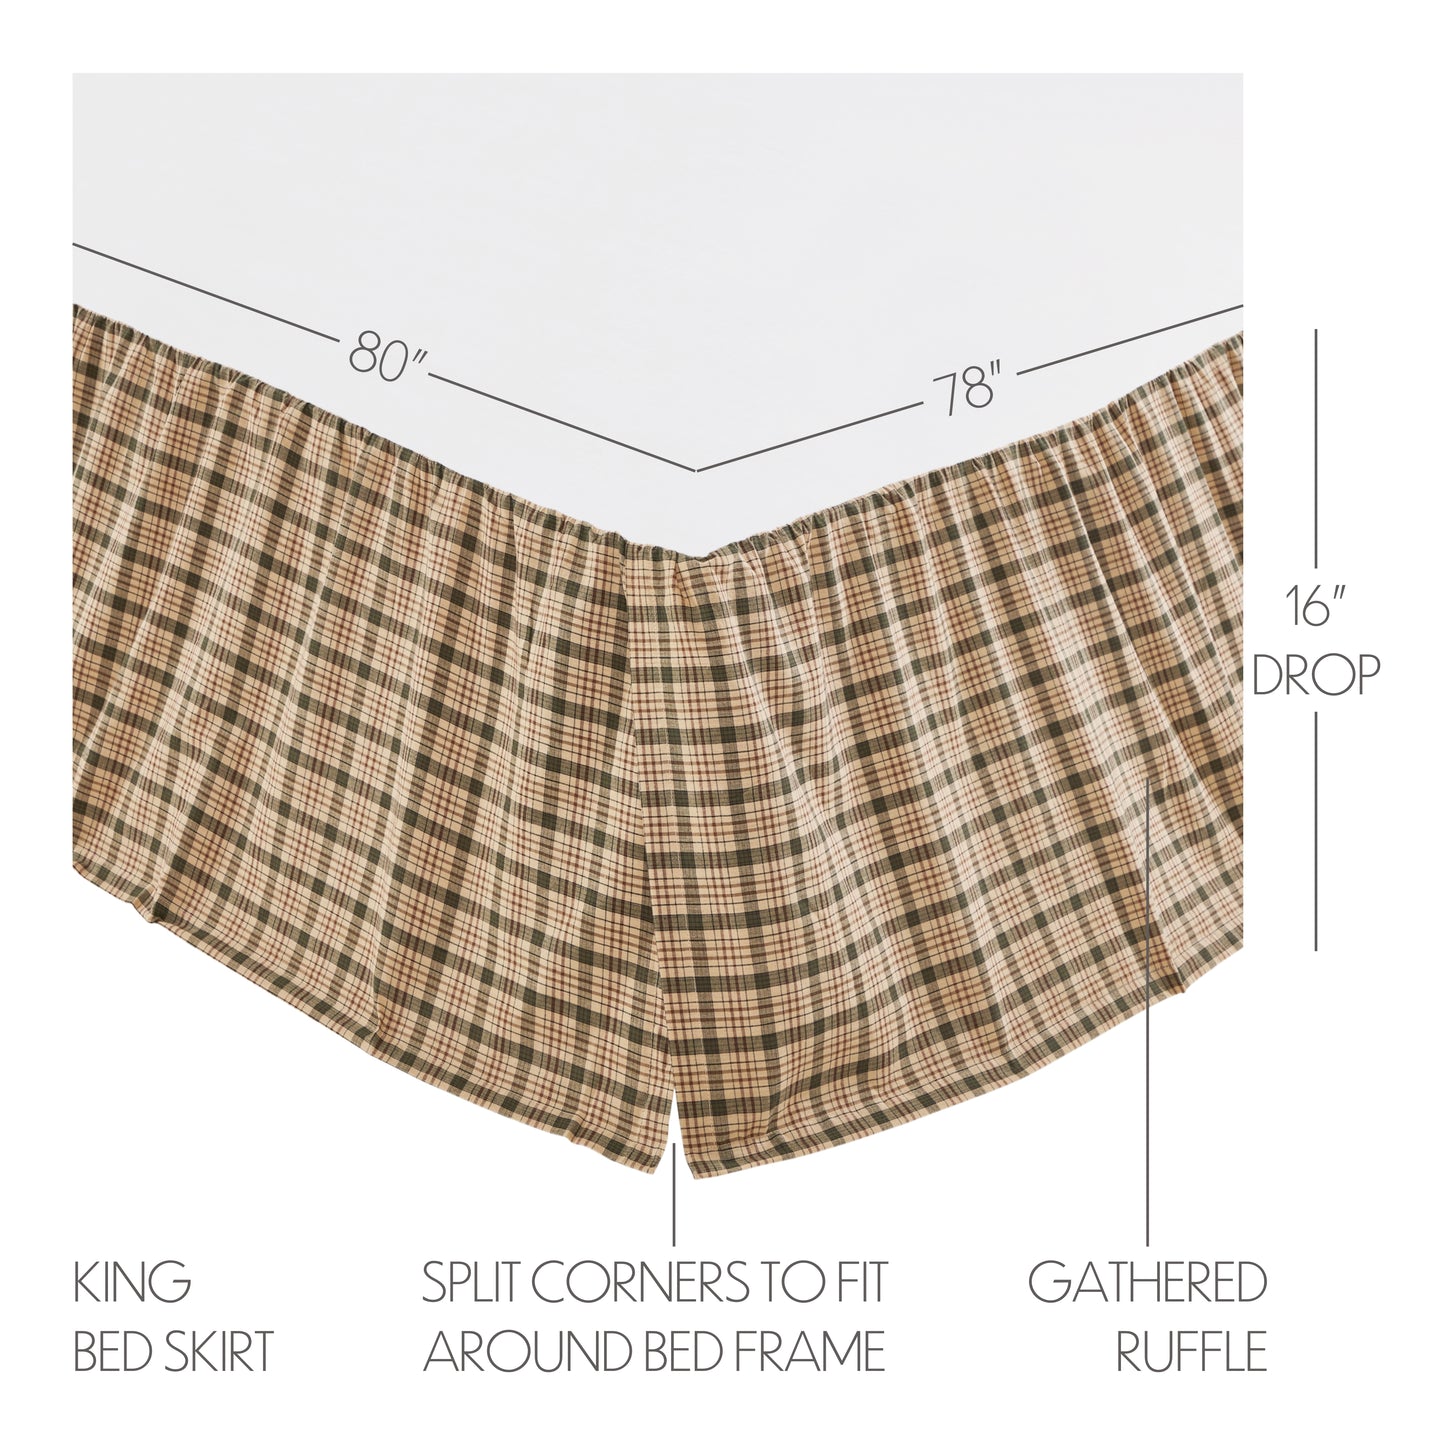 80317-Cider-Mill-King-Bed-Skirt-78x80x16-image-3